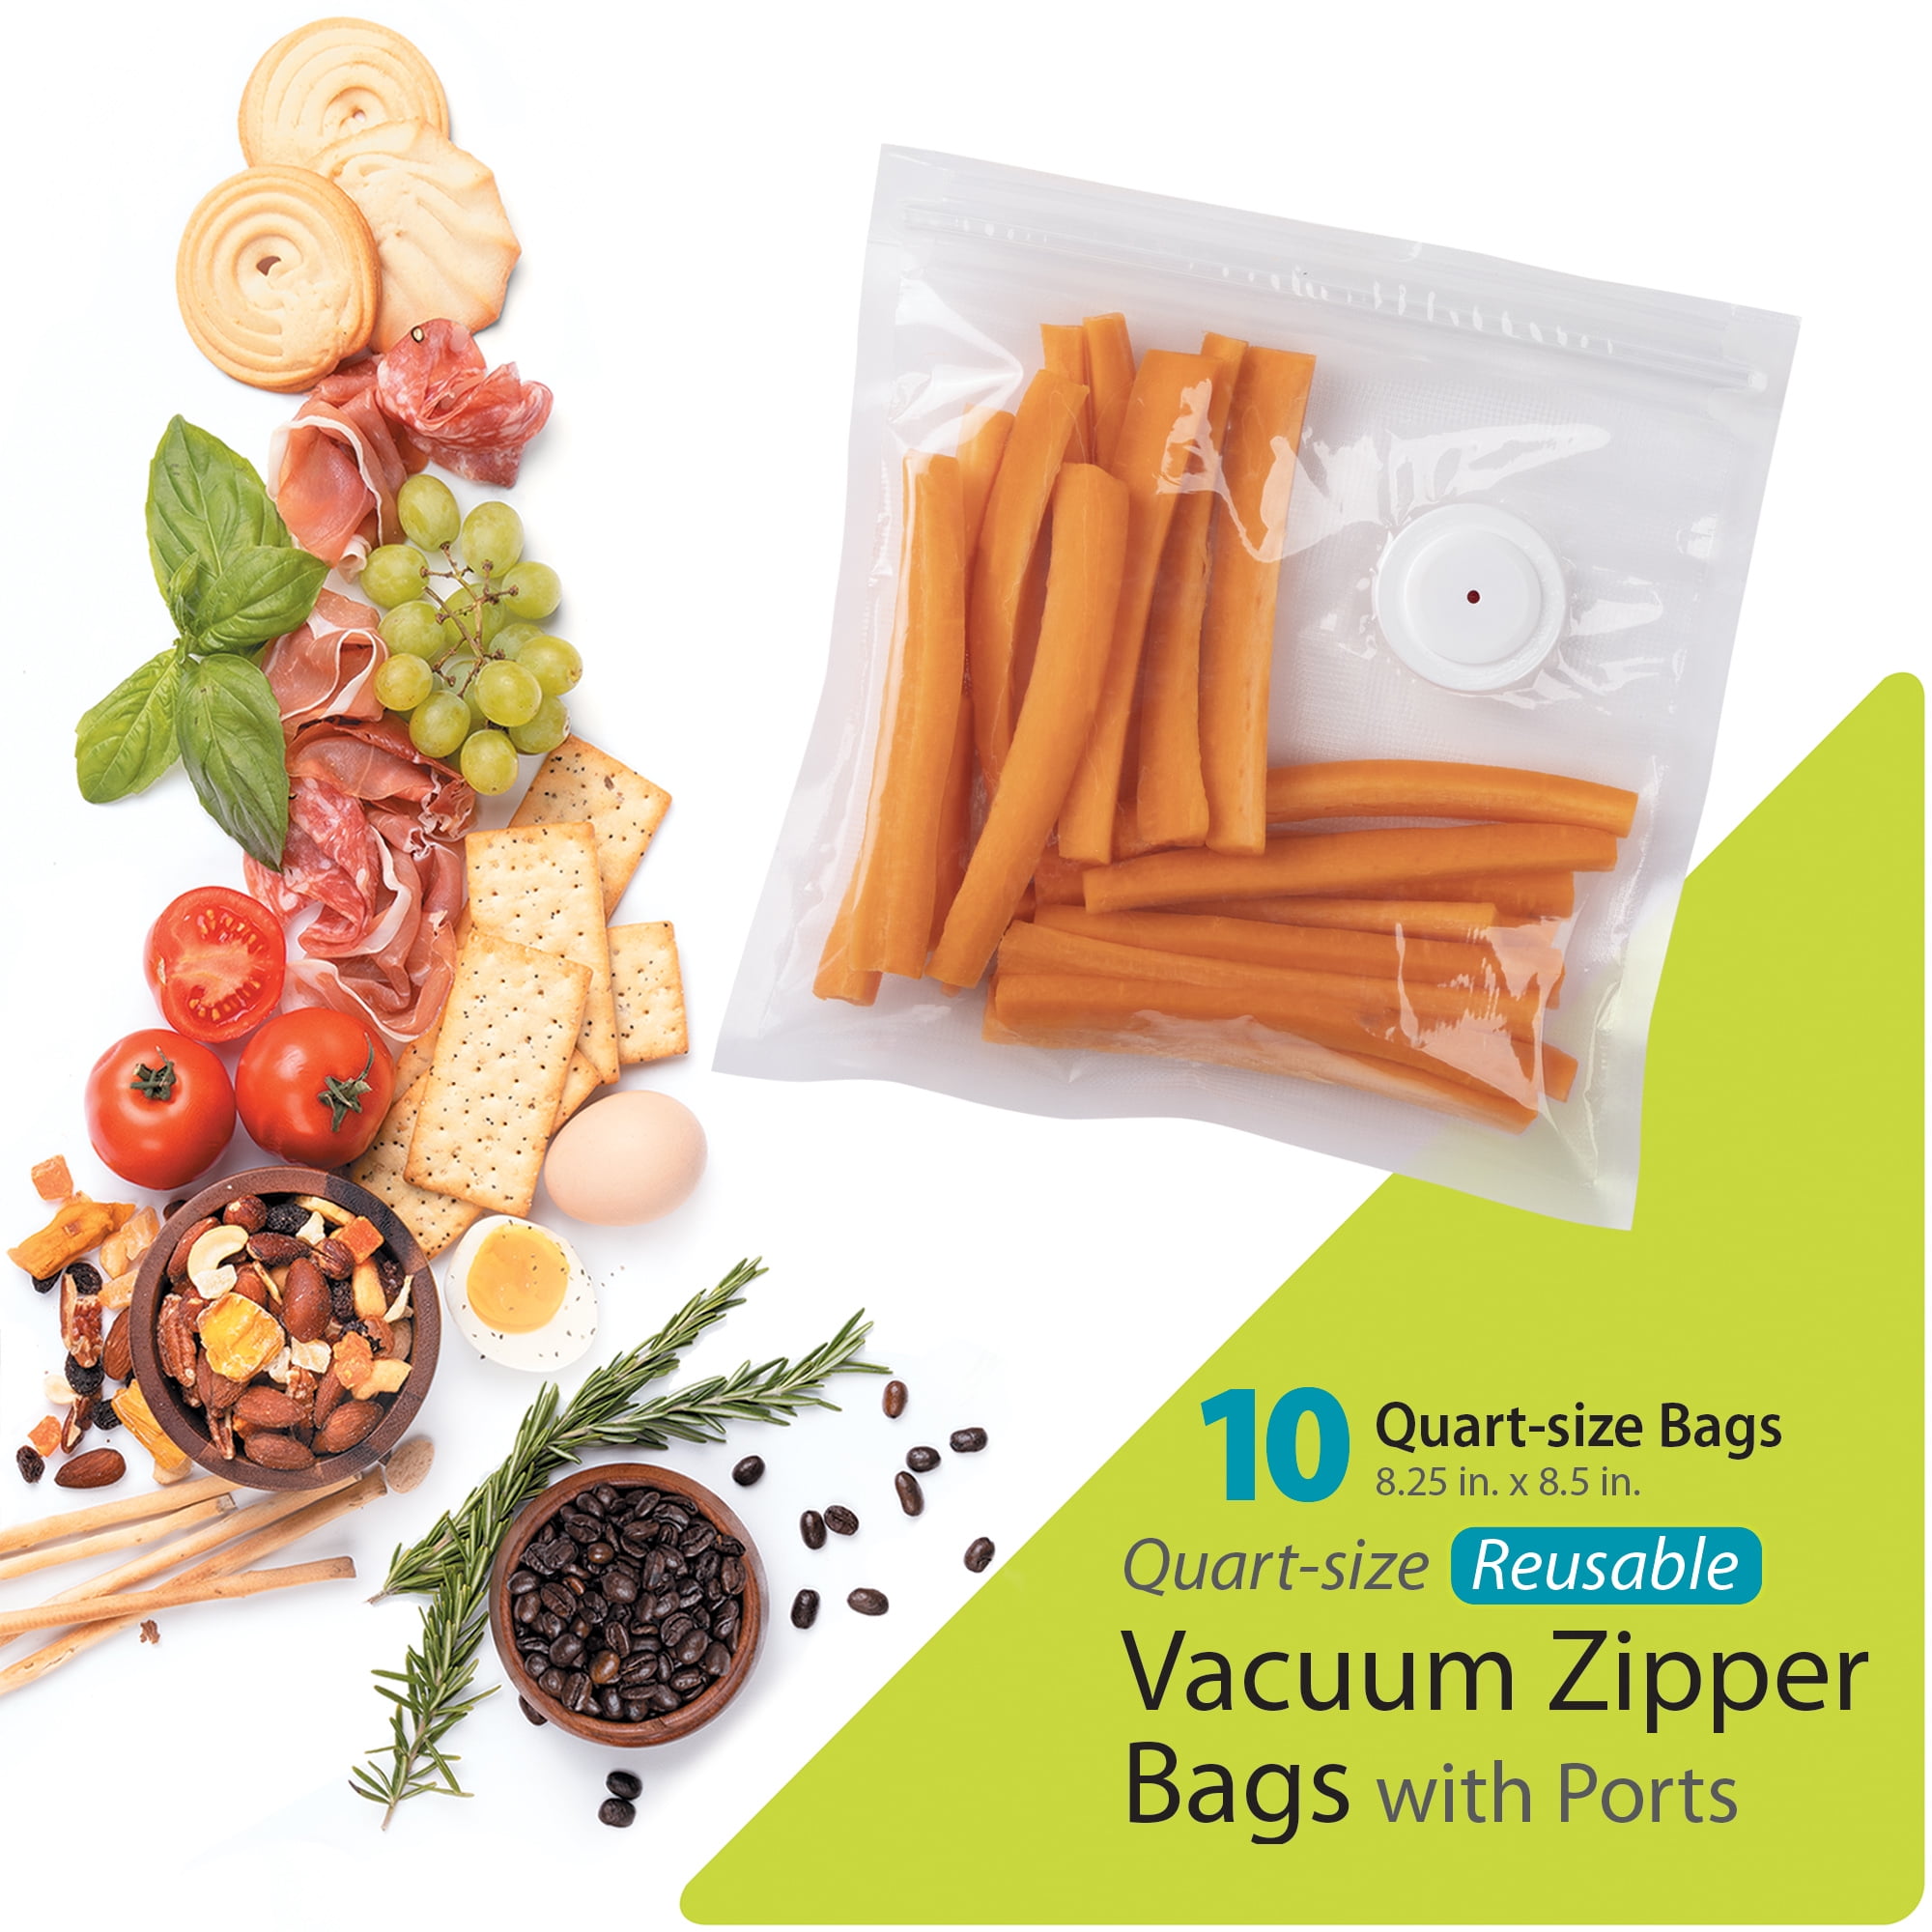 FreshDaddy™ Gallon-size Reusable Vacuum Zipper Bags with Ports for